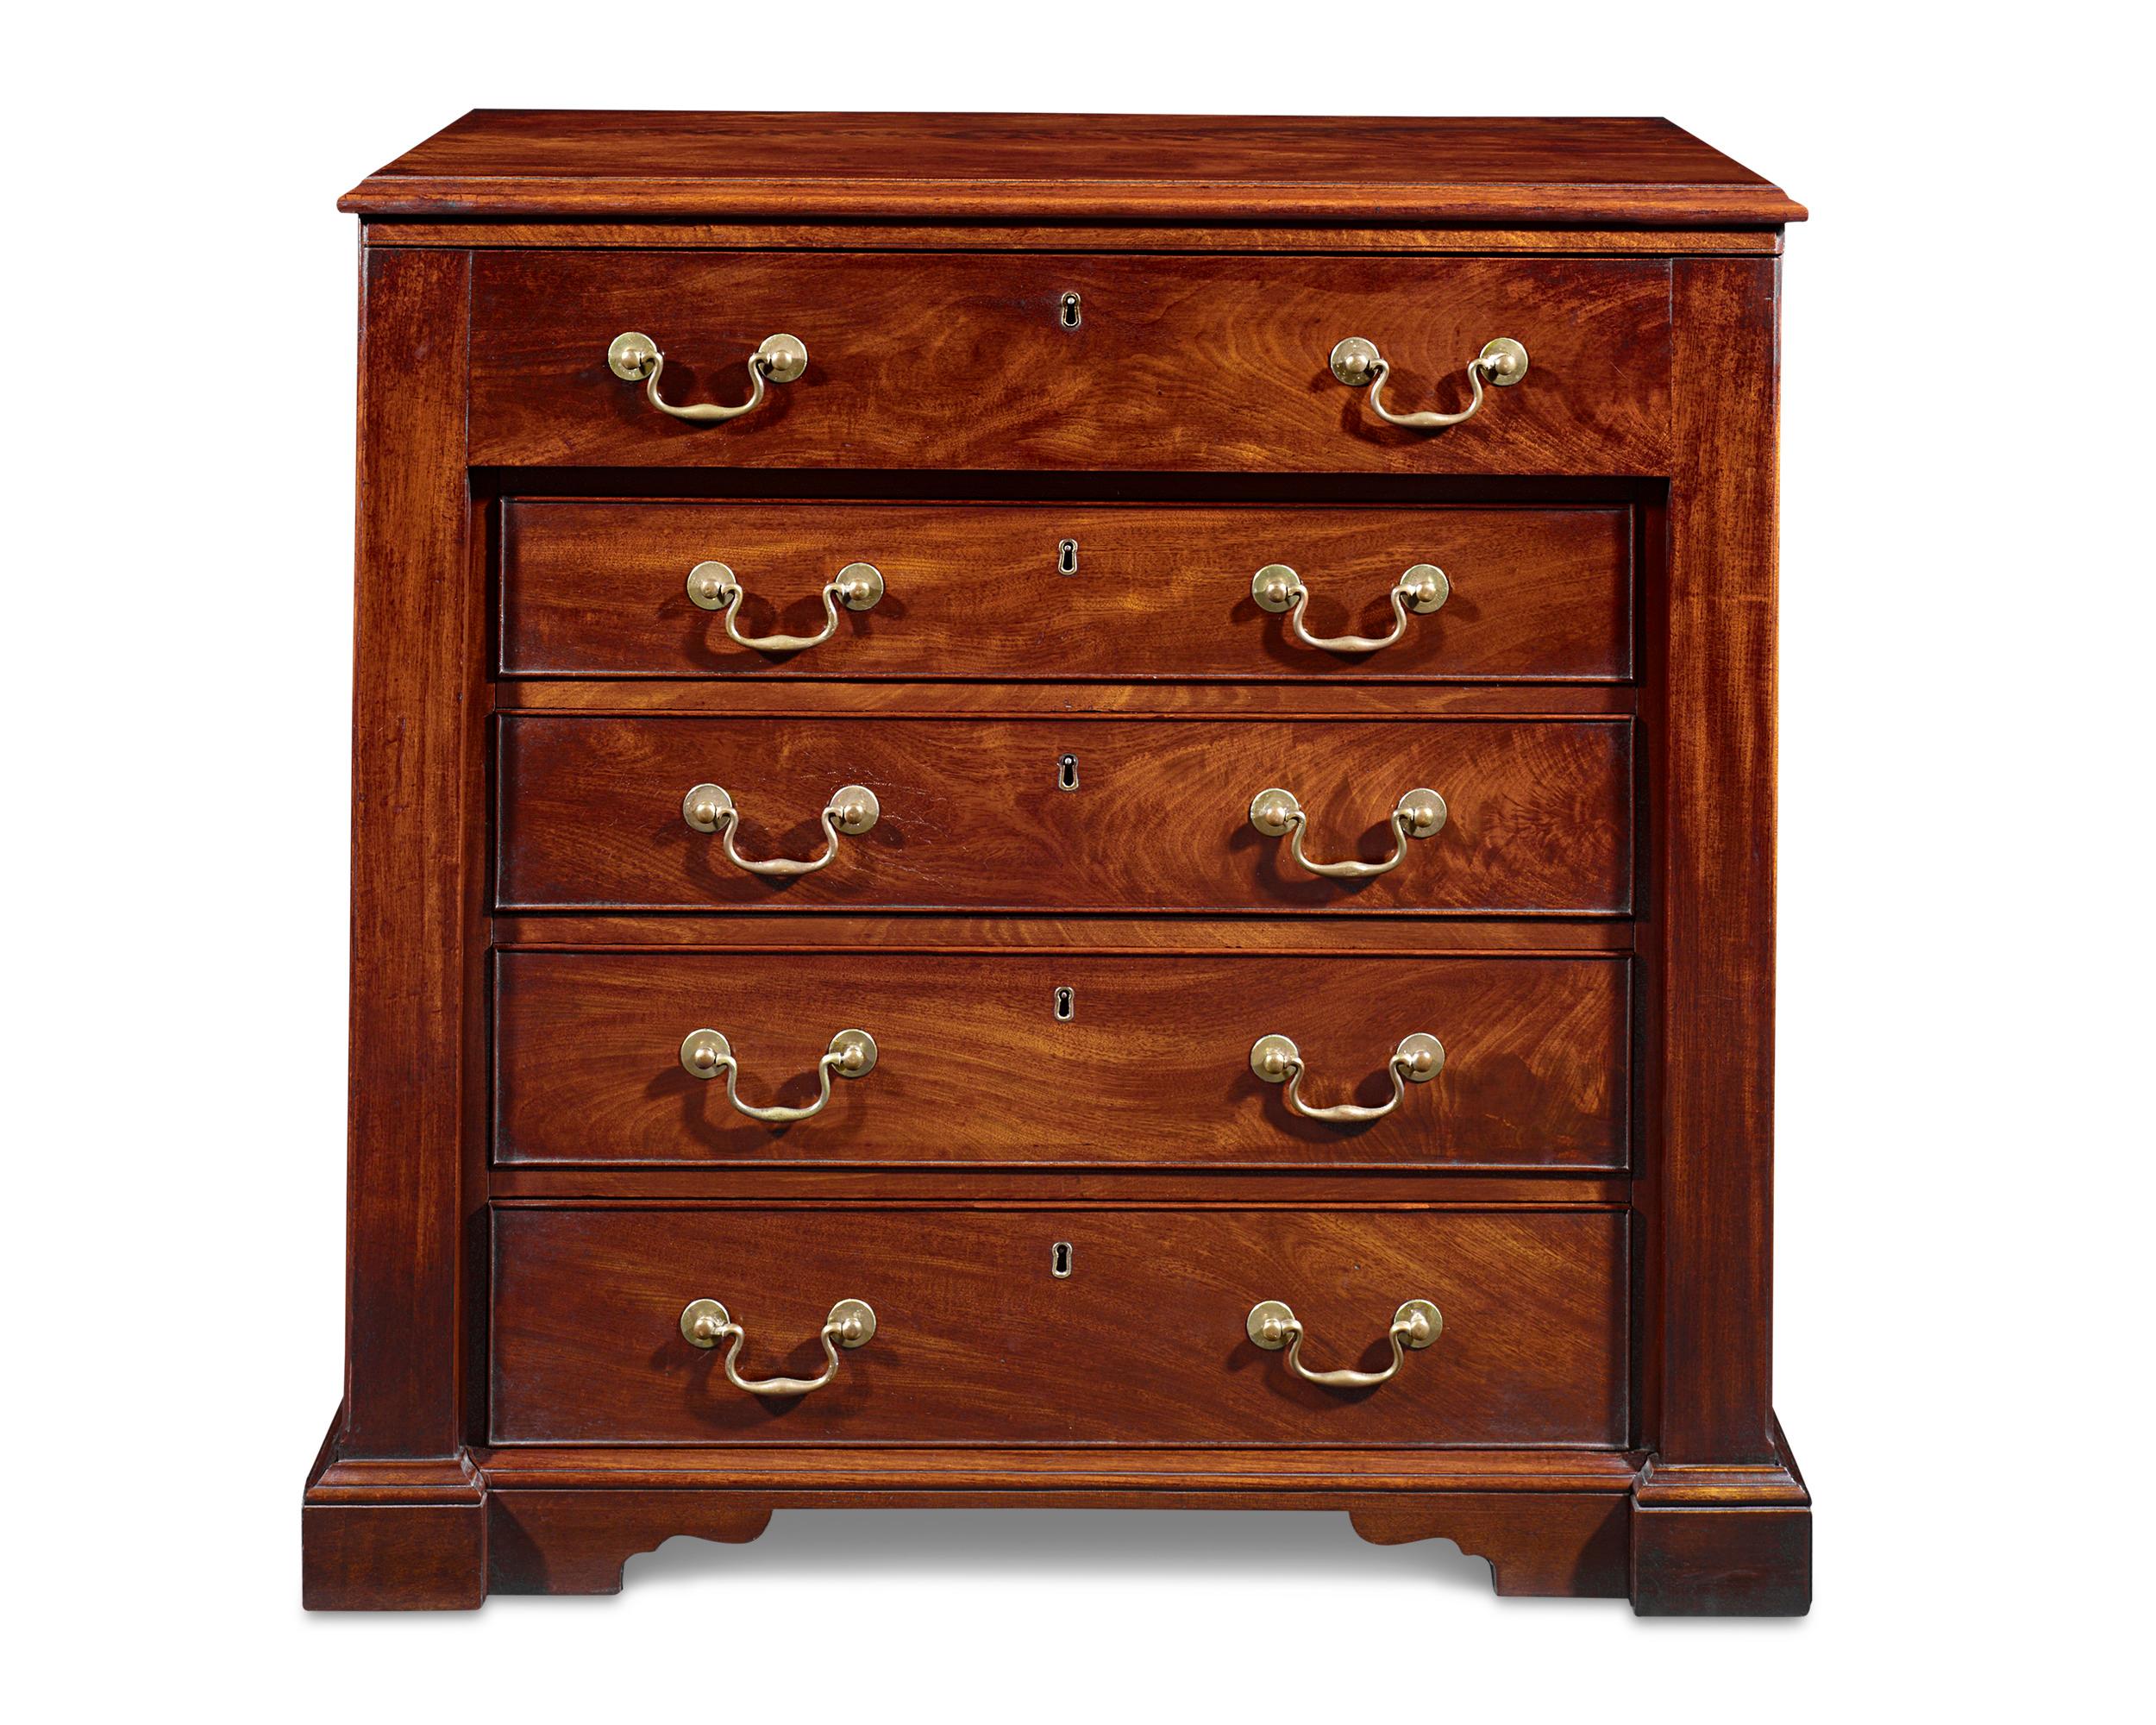  Thomas Chippendale Artist's Chest 1